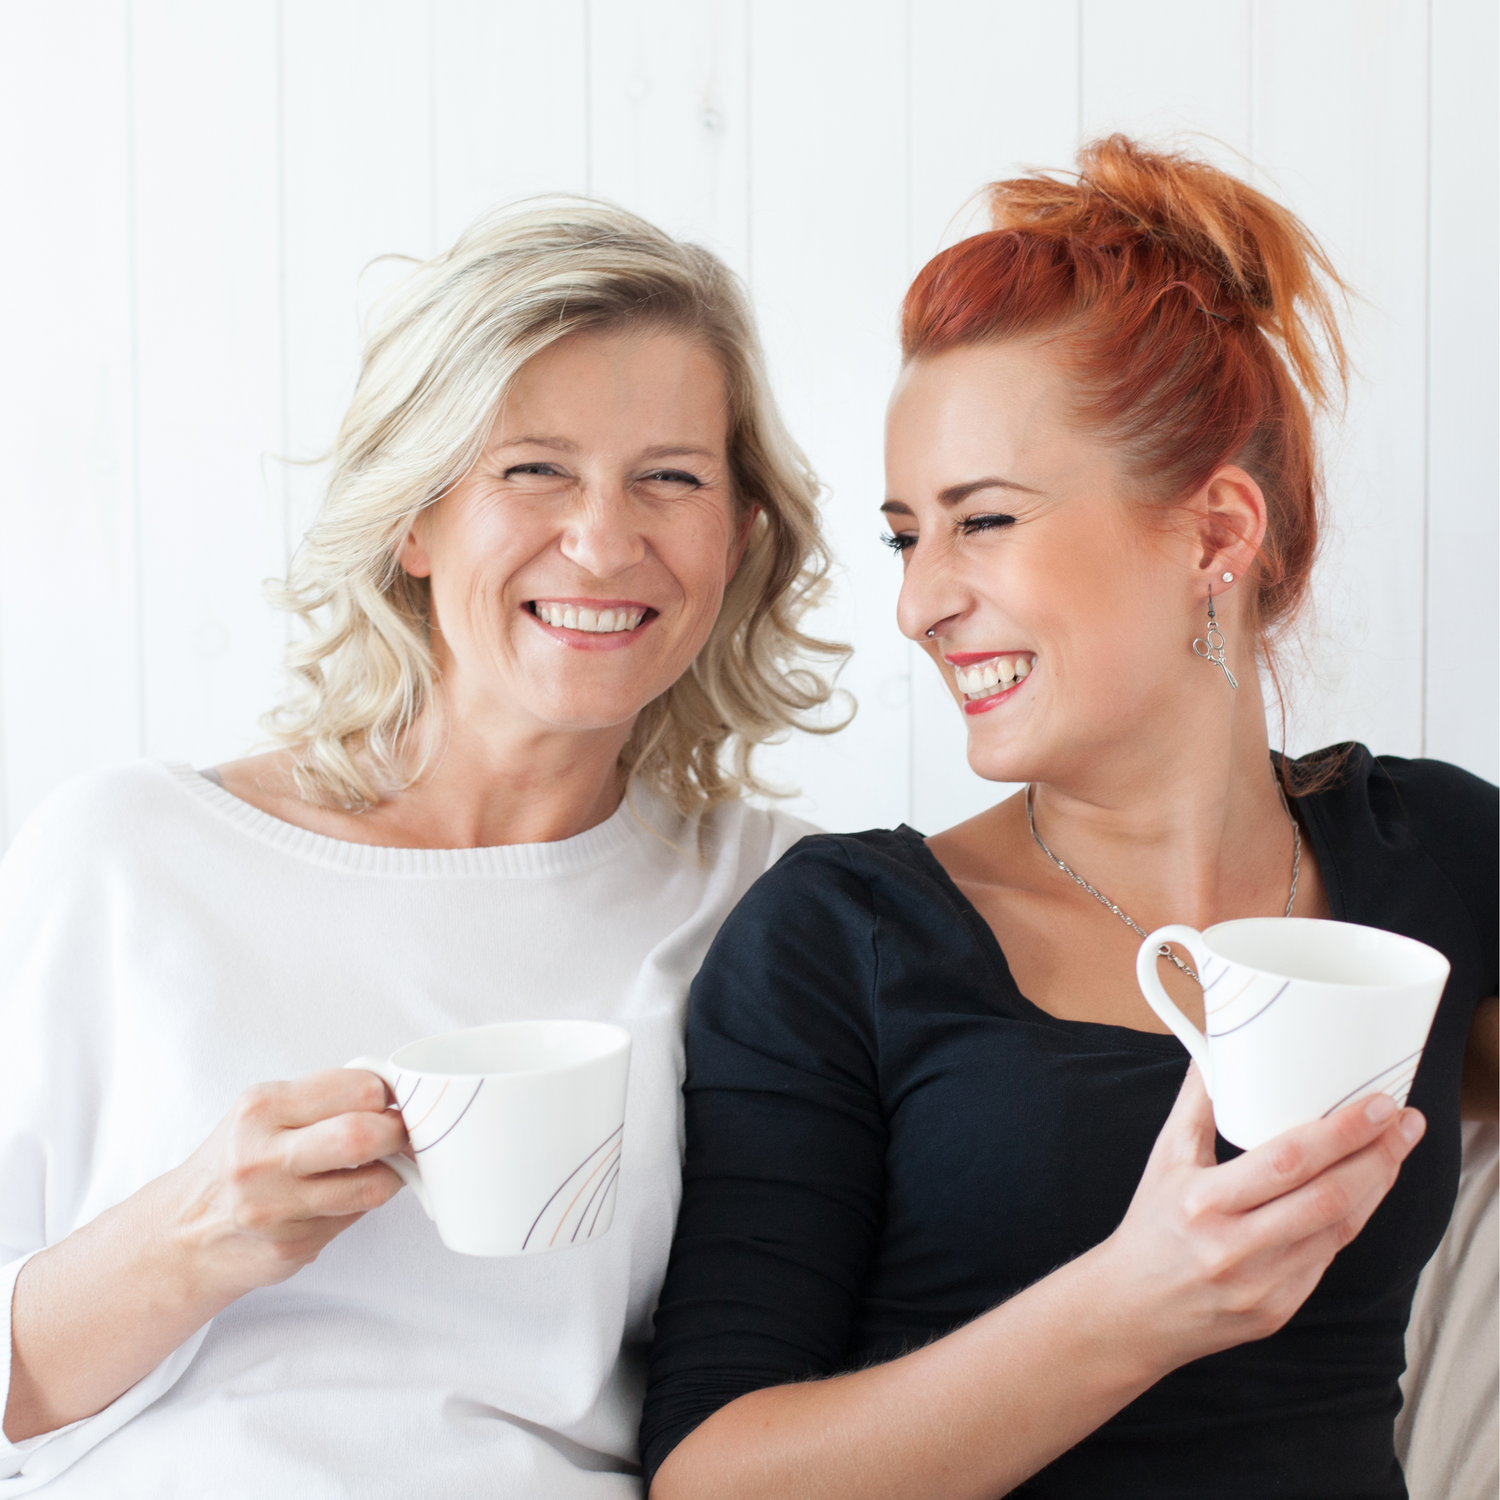 Mother and daughter sitting side-by-side smiling